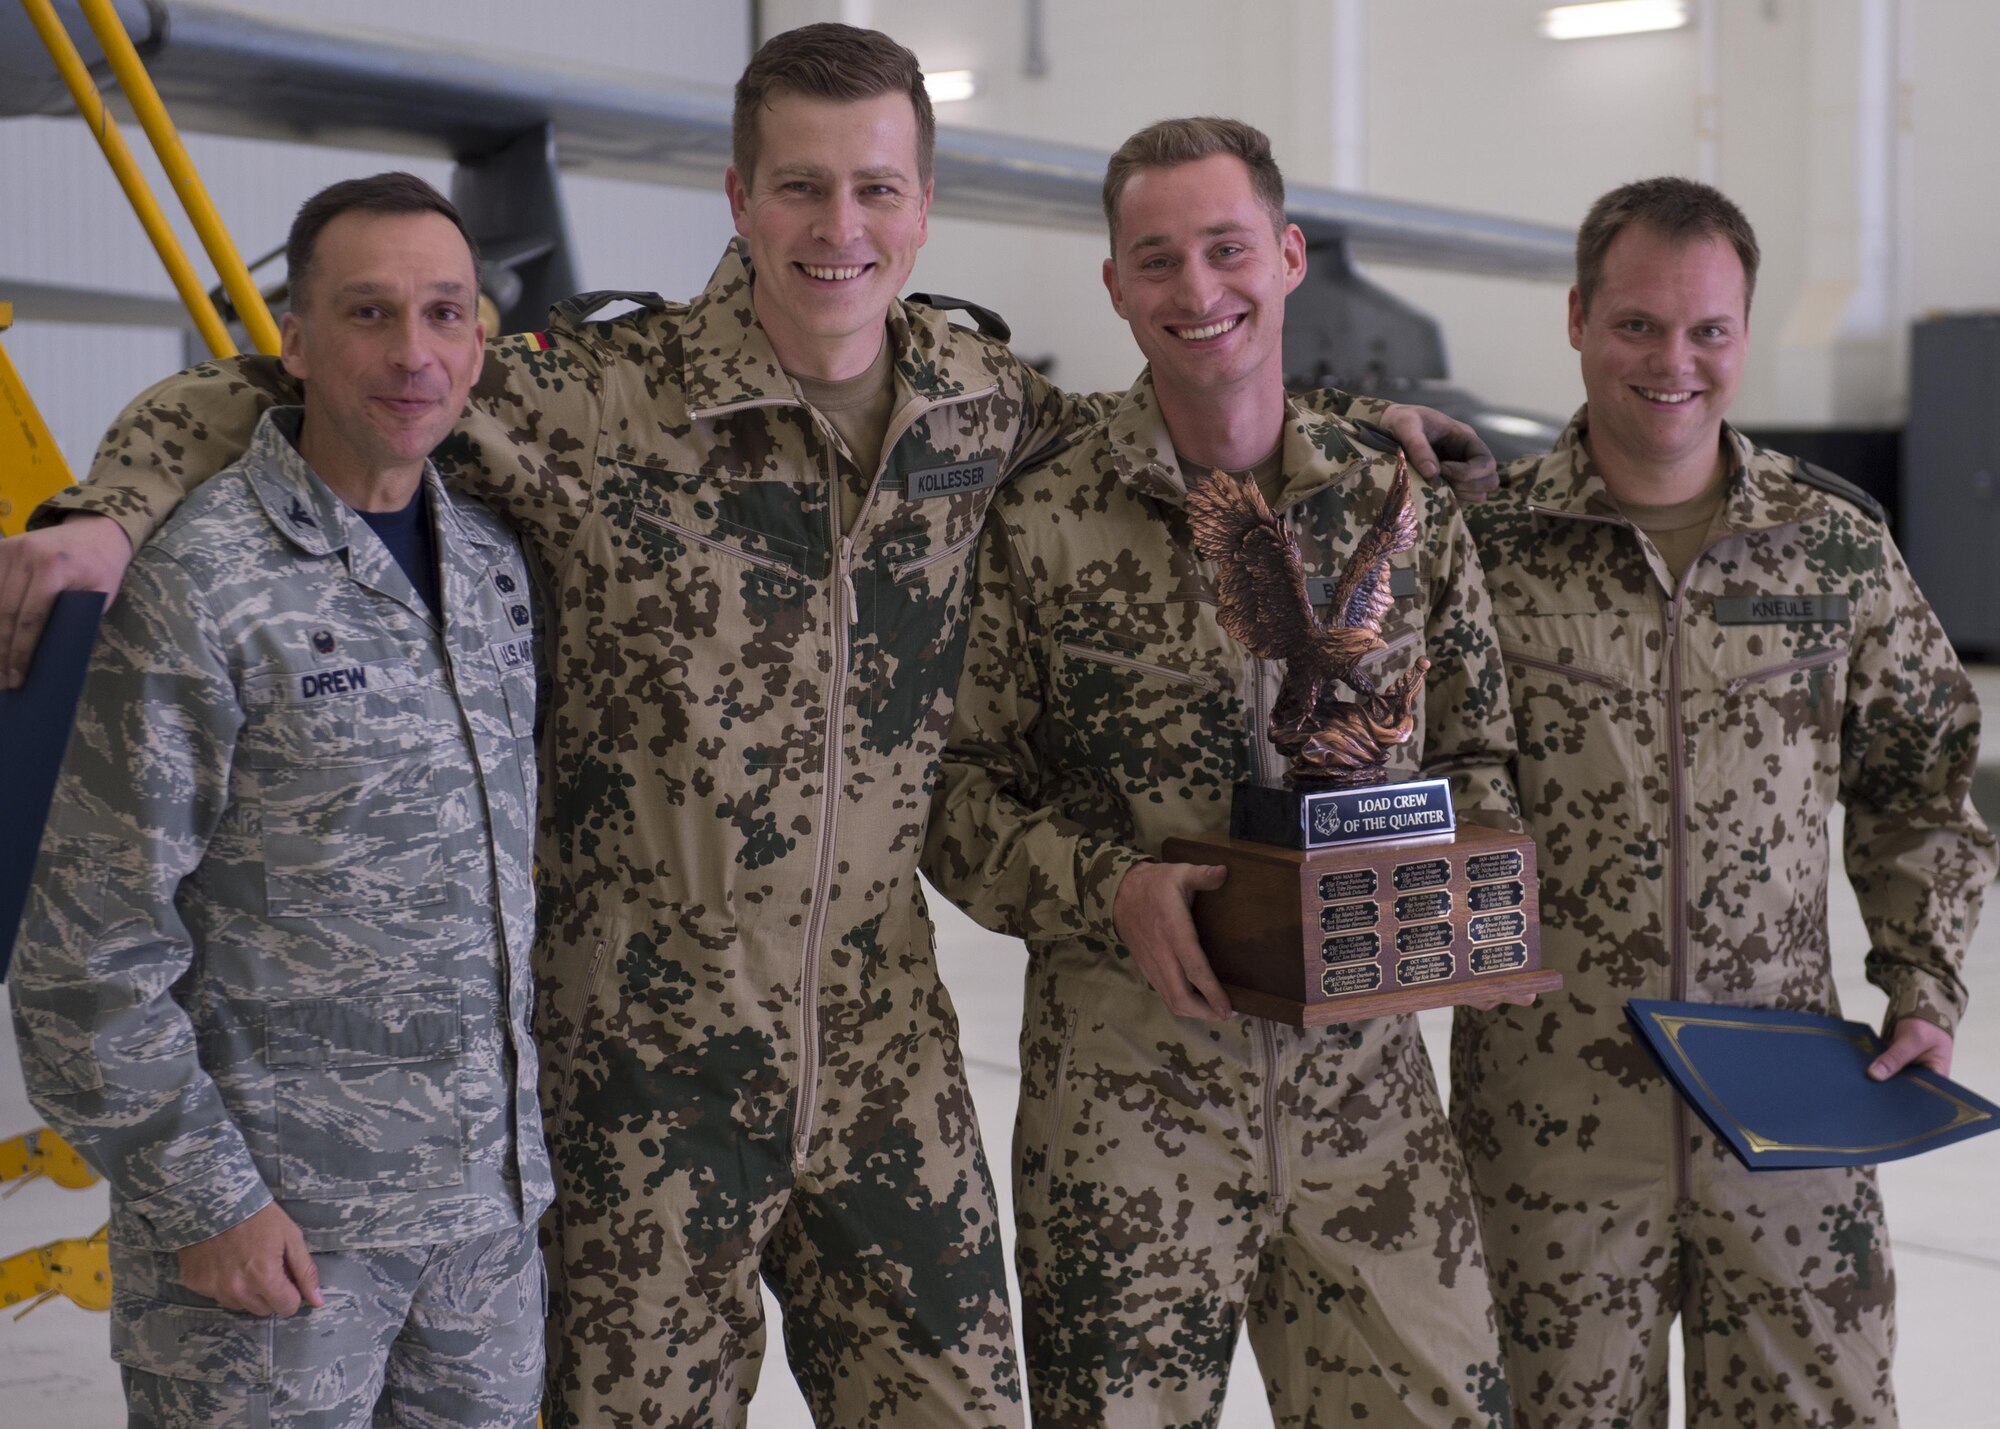 Col. Lyle Drew, 49th Maintenance Group commander, poses with the winning load crew from the German Air Force Flying Training Center following a load crew competition at Holloman Air Force Base, N.M., Jan. 20, 2017. The GAF competed for the last time in the load crew competition to have their skills evaluated alongside the MQ-9 Reaper, and the F-16 Fighting Falcon load crews. Points for the competition are awarded based on weapons loading, tool kit inspection and uniform inspection categories. (U.S. Air Force photo by Senior Airman Chase Cannon/ Released)